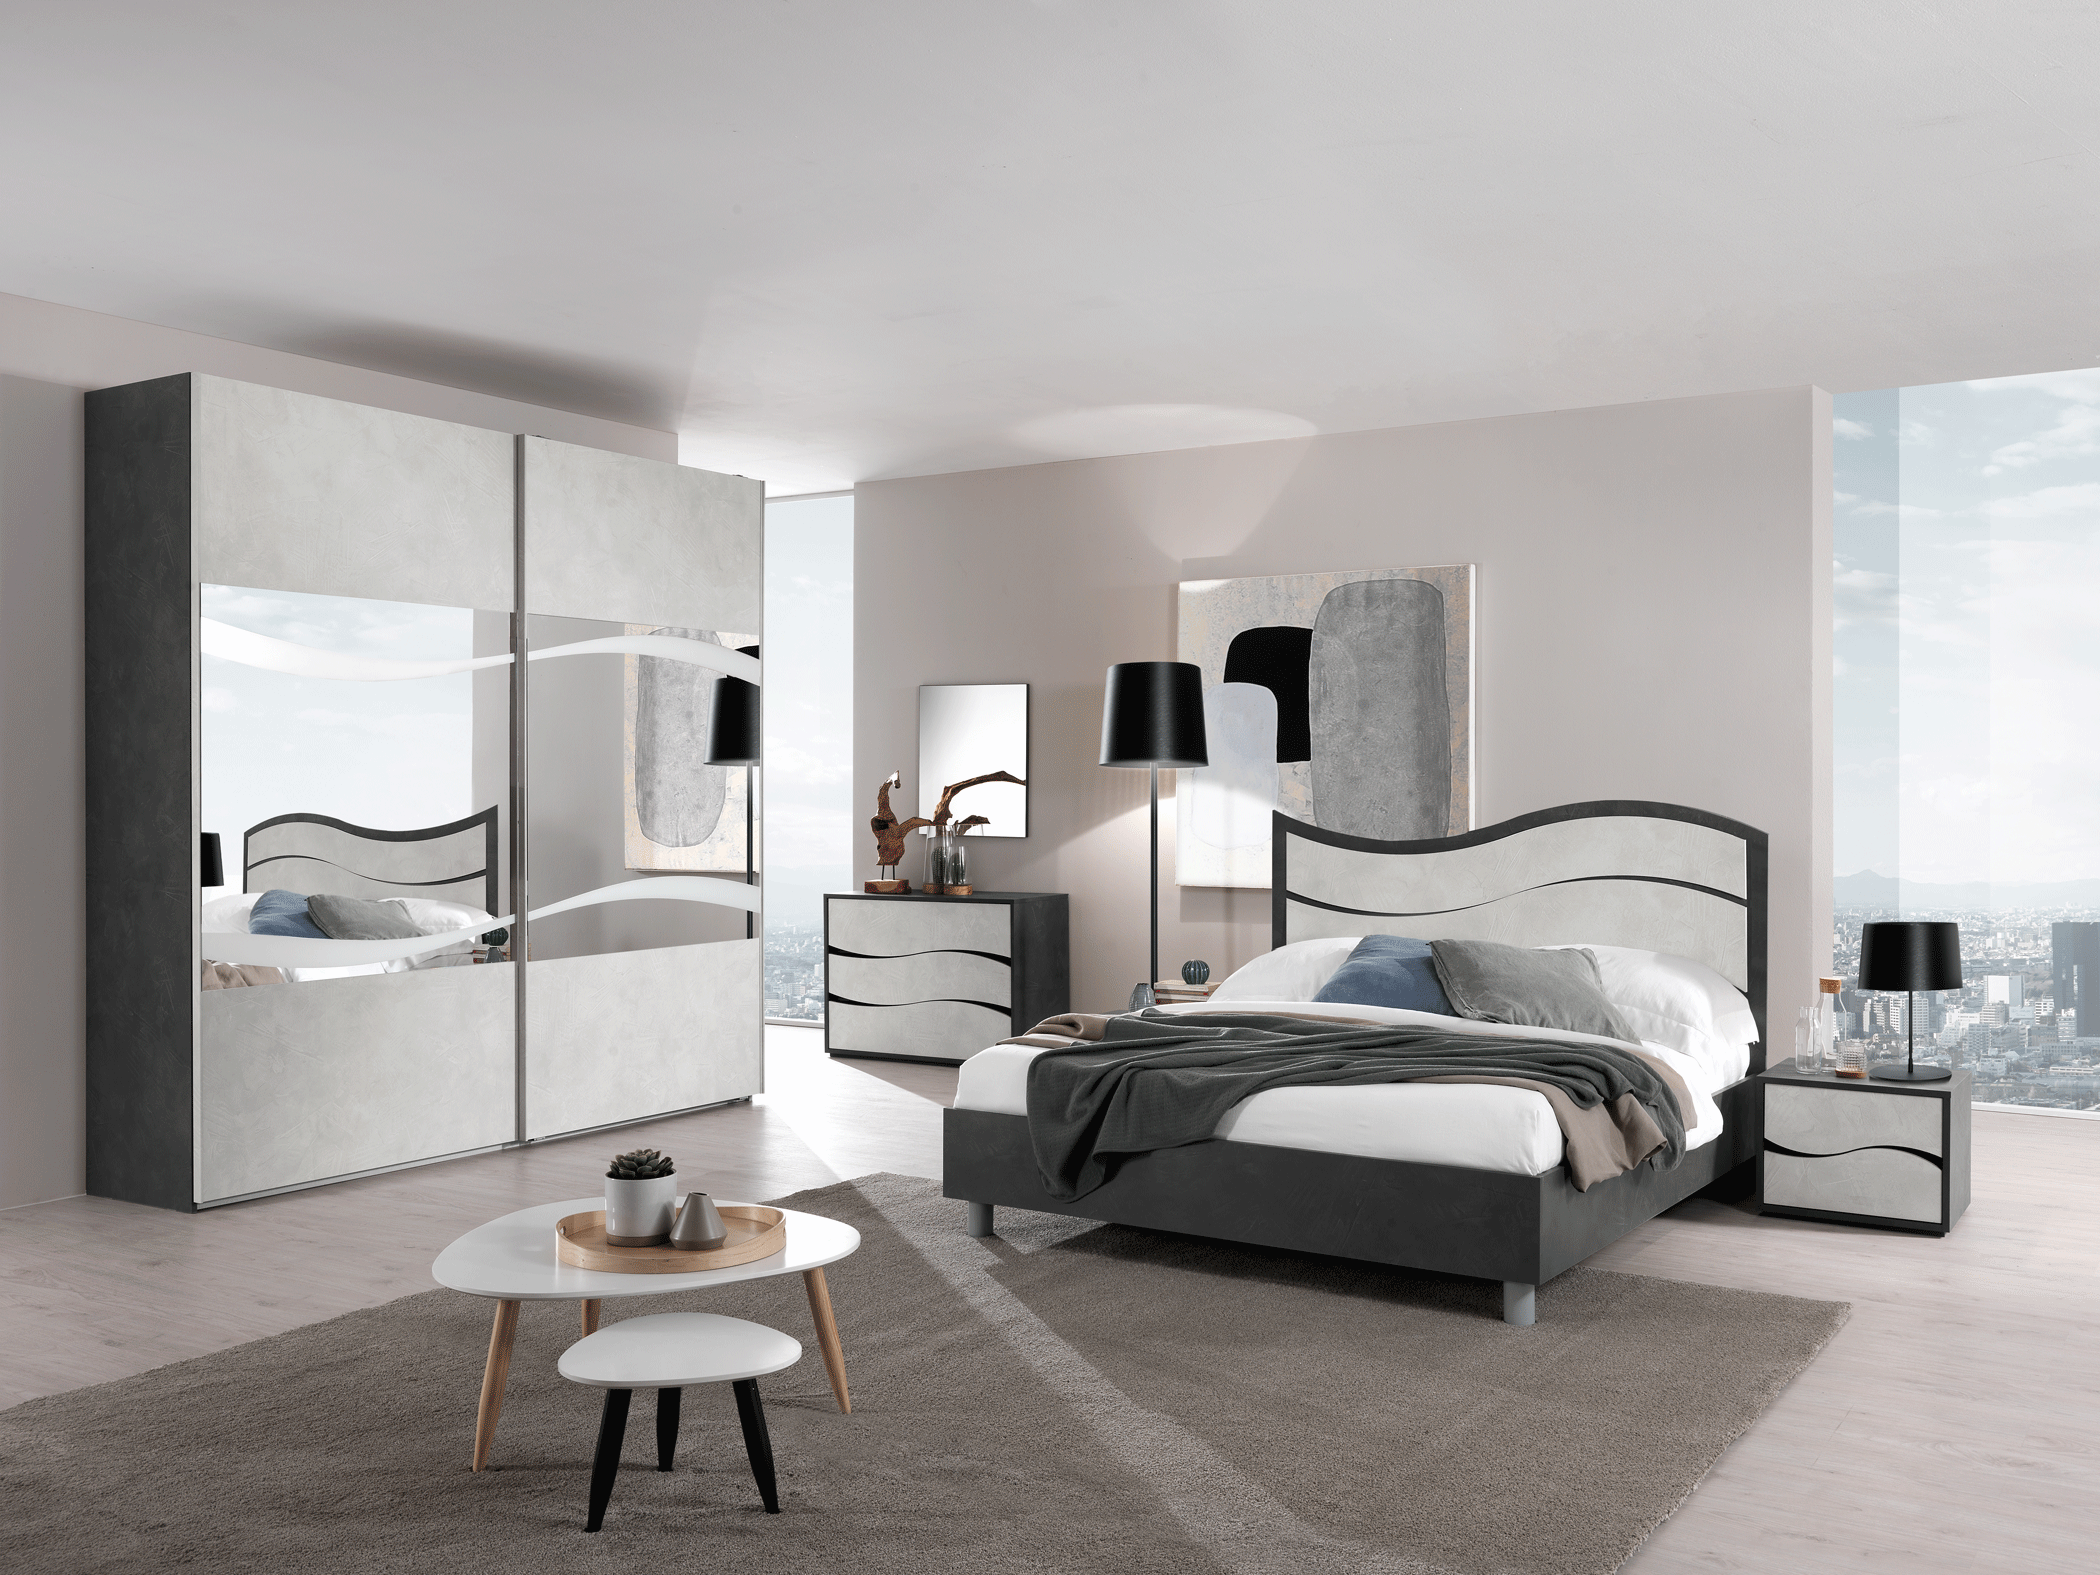 Brands Status Modern Collections, Italy Ischia Bedroom Additional items